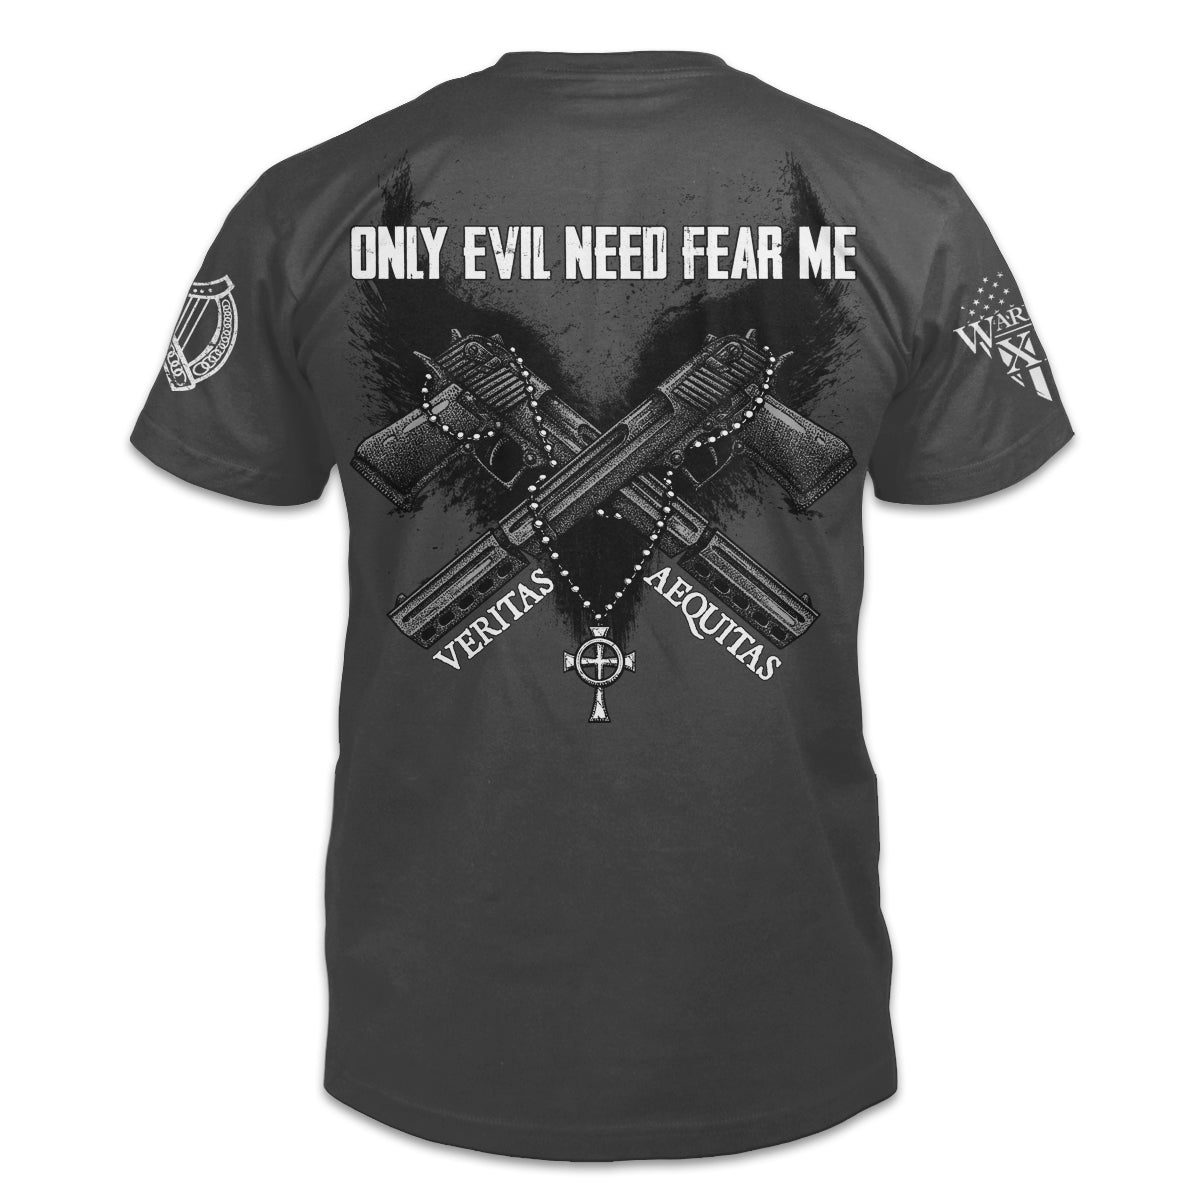 A dark grey t-shirt with the words "Only evil need fear me" which is an an old Irish saying; a warning against those who would prey on others with two guns printed on the back of the shirt.